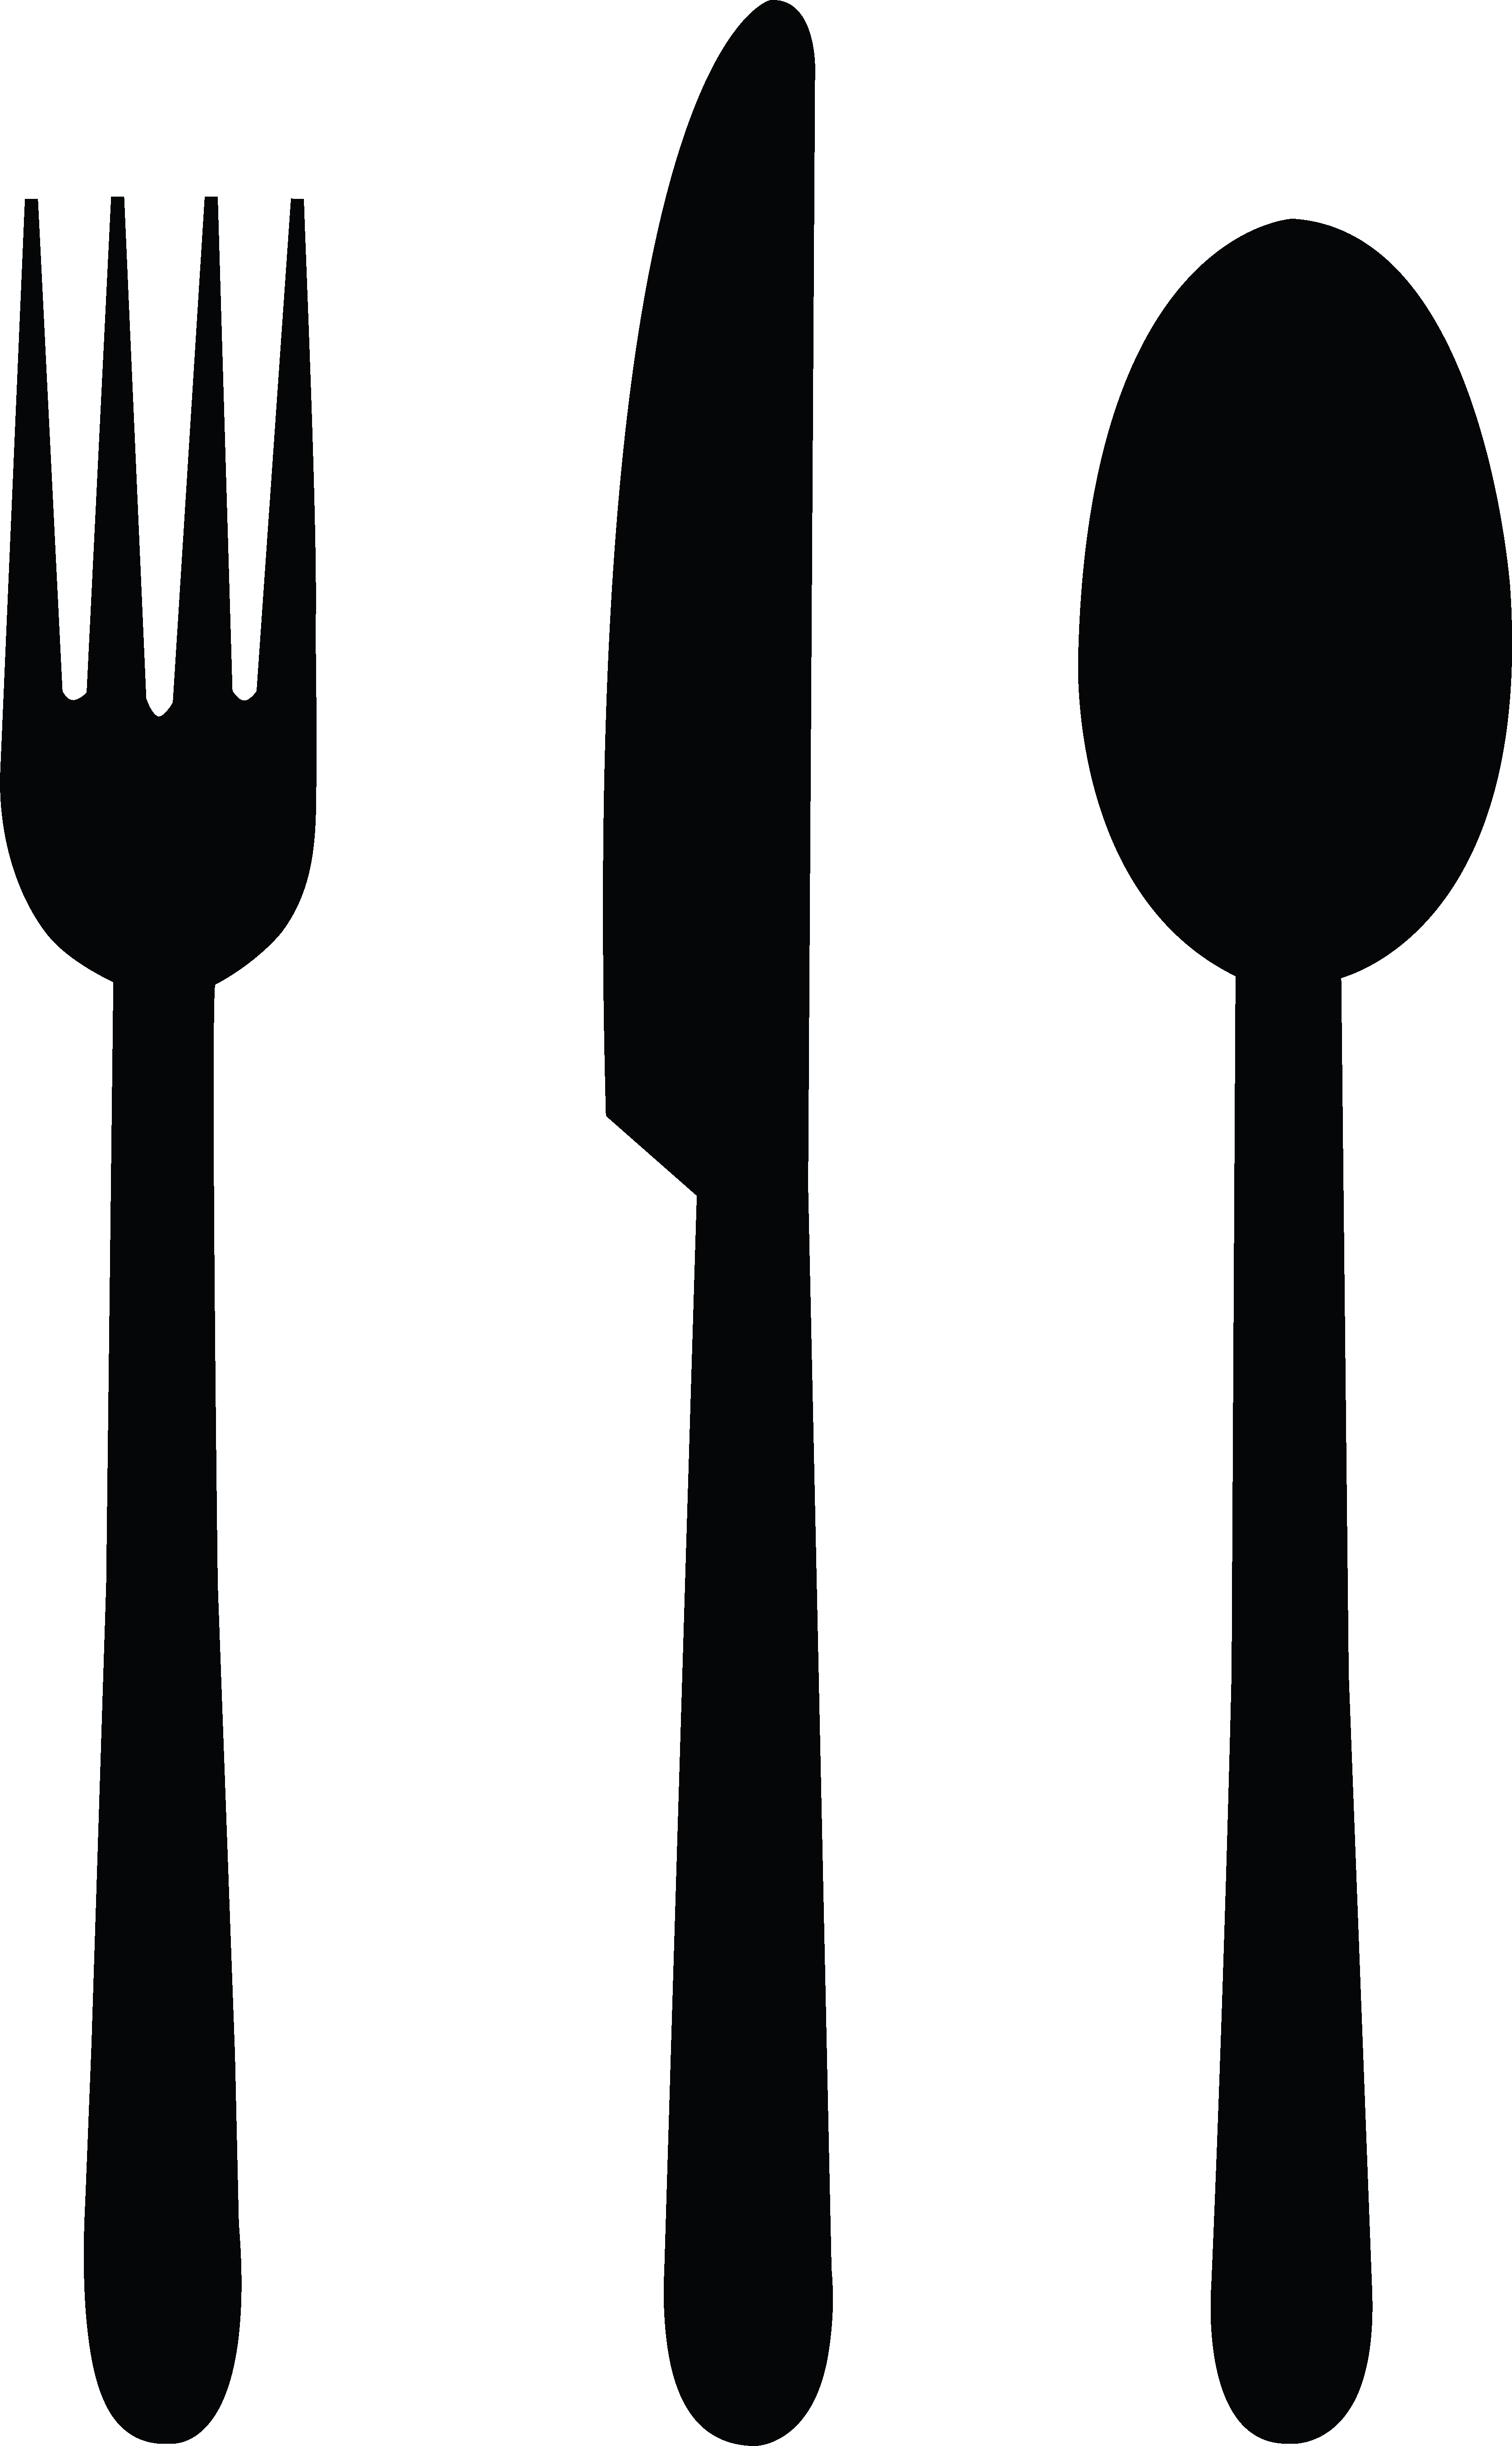 Knife And Fork Vector Free - ClipArt Best